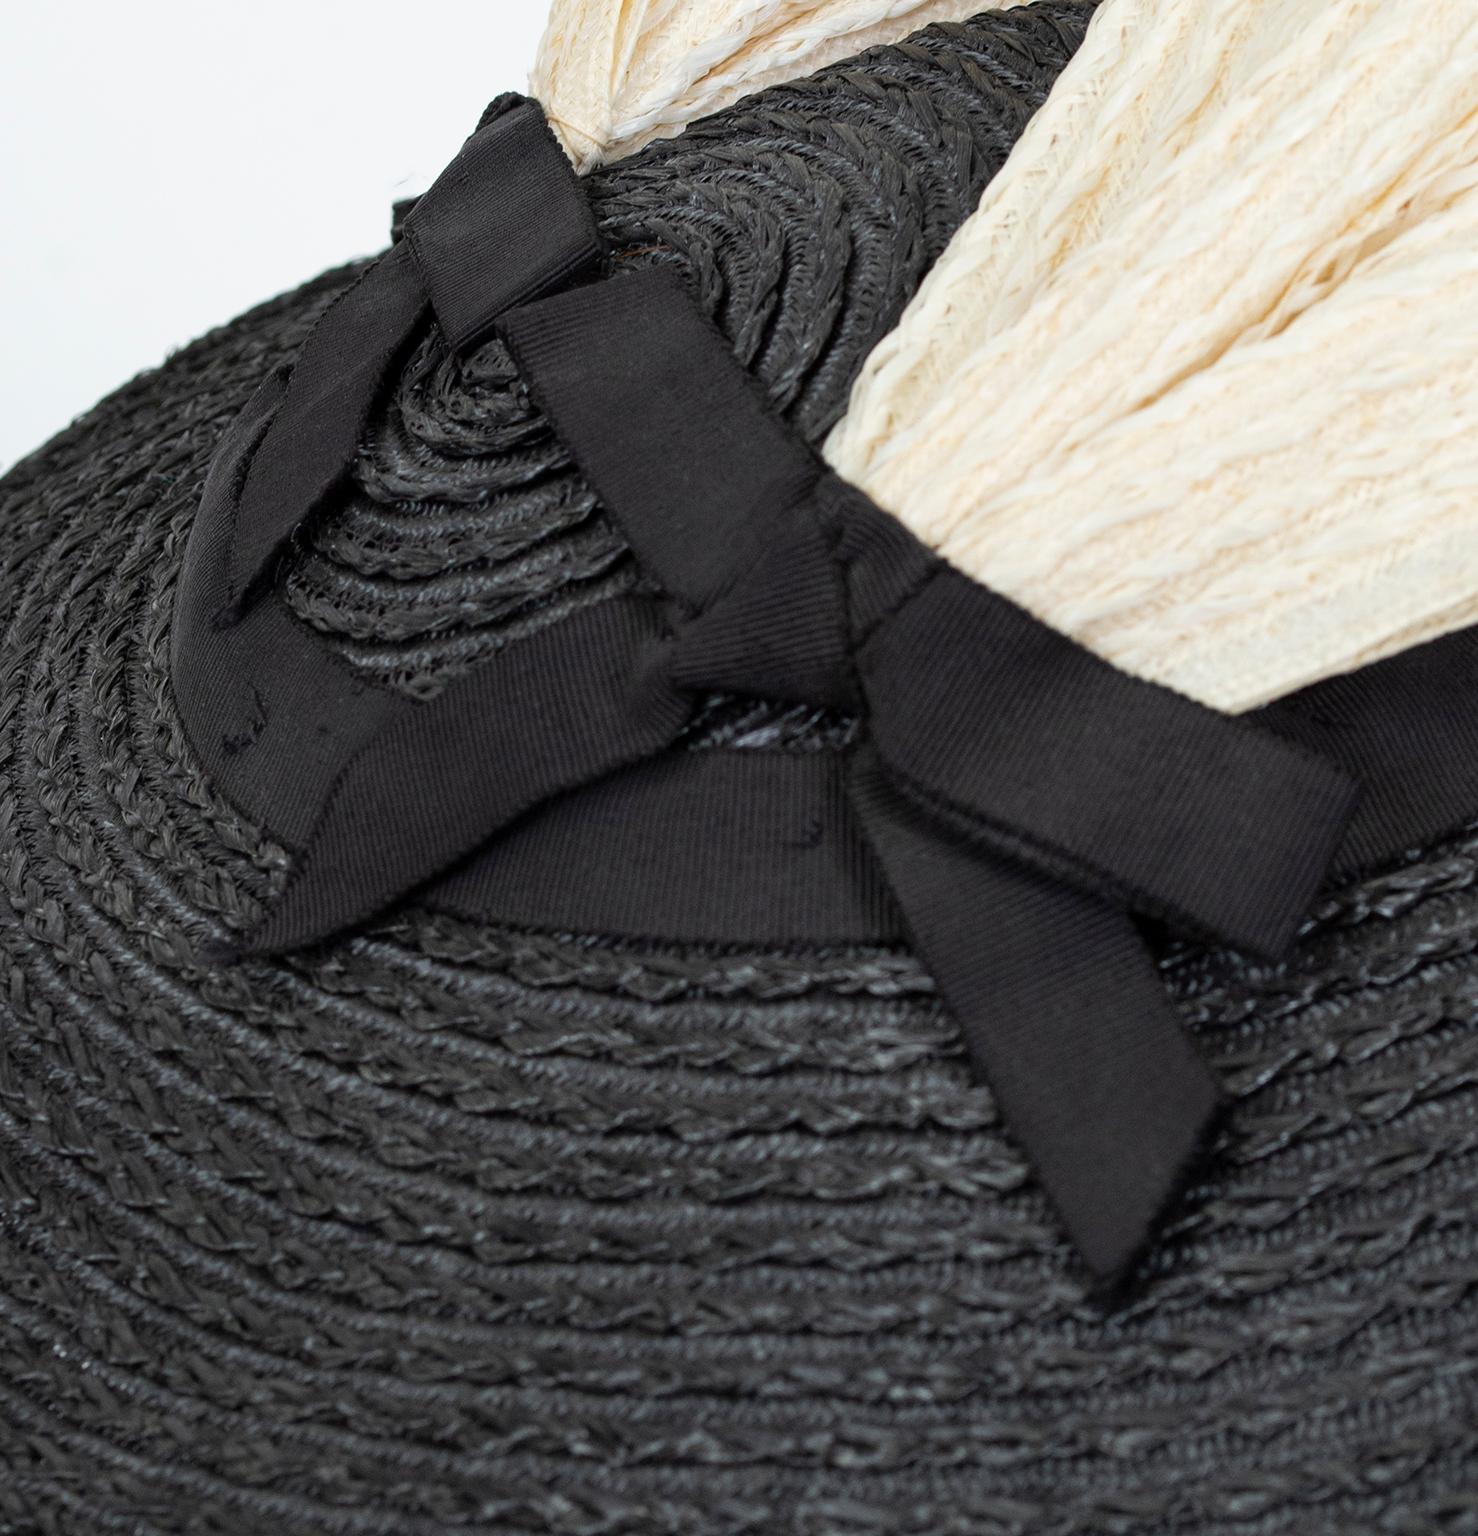 Black and Ivory Winged Straw Pancake Boater Hat with Rear Bows – S, 1930s In Good Condition For Sale In Tucson, AZ